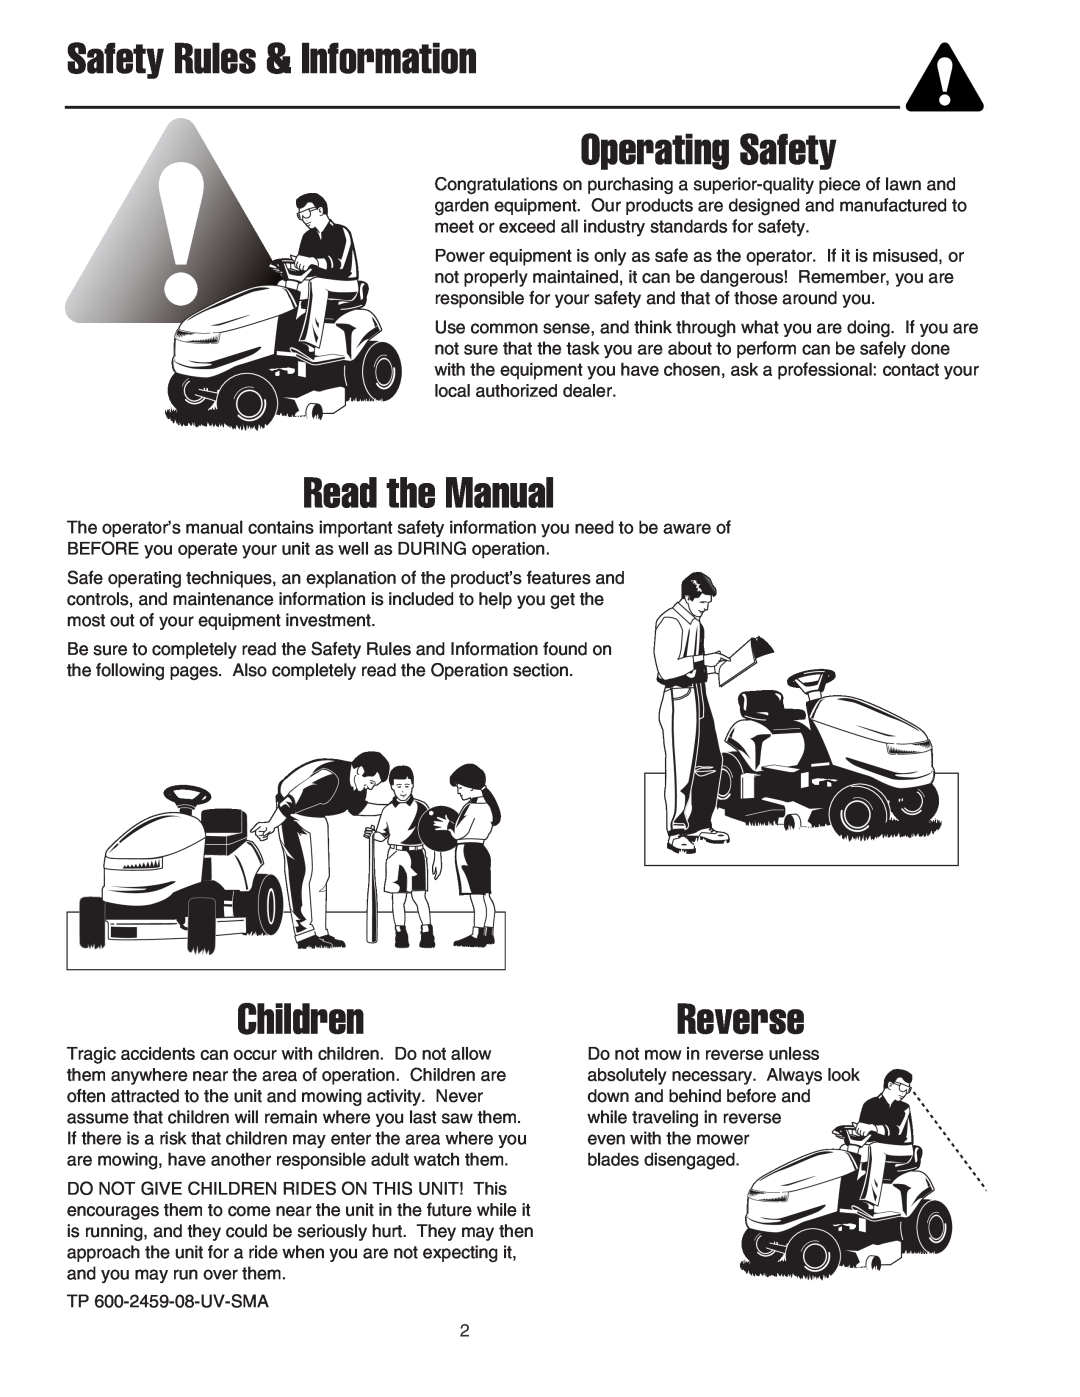 Snapper 400 Series manual Safety Rules & Information Operating Safety, Read the Manual, ChildrenReverse 